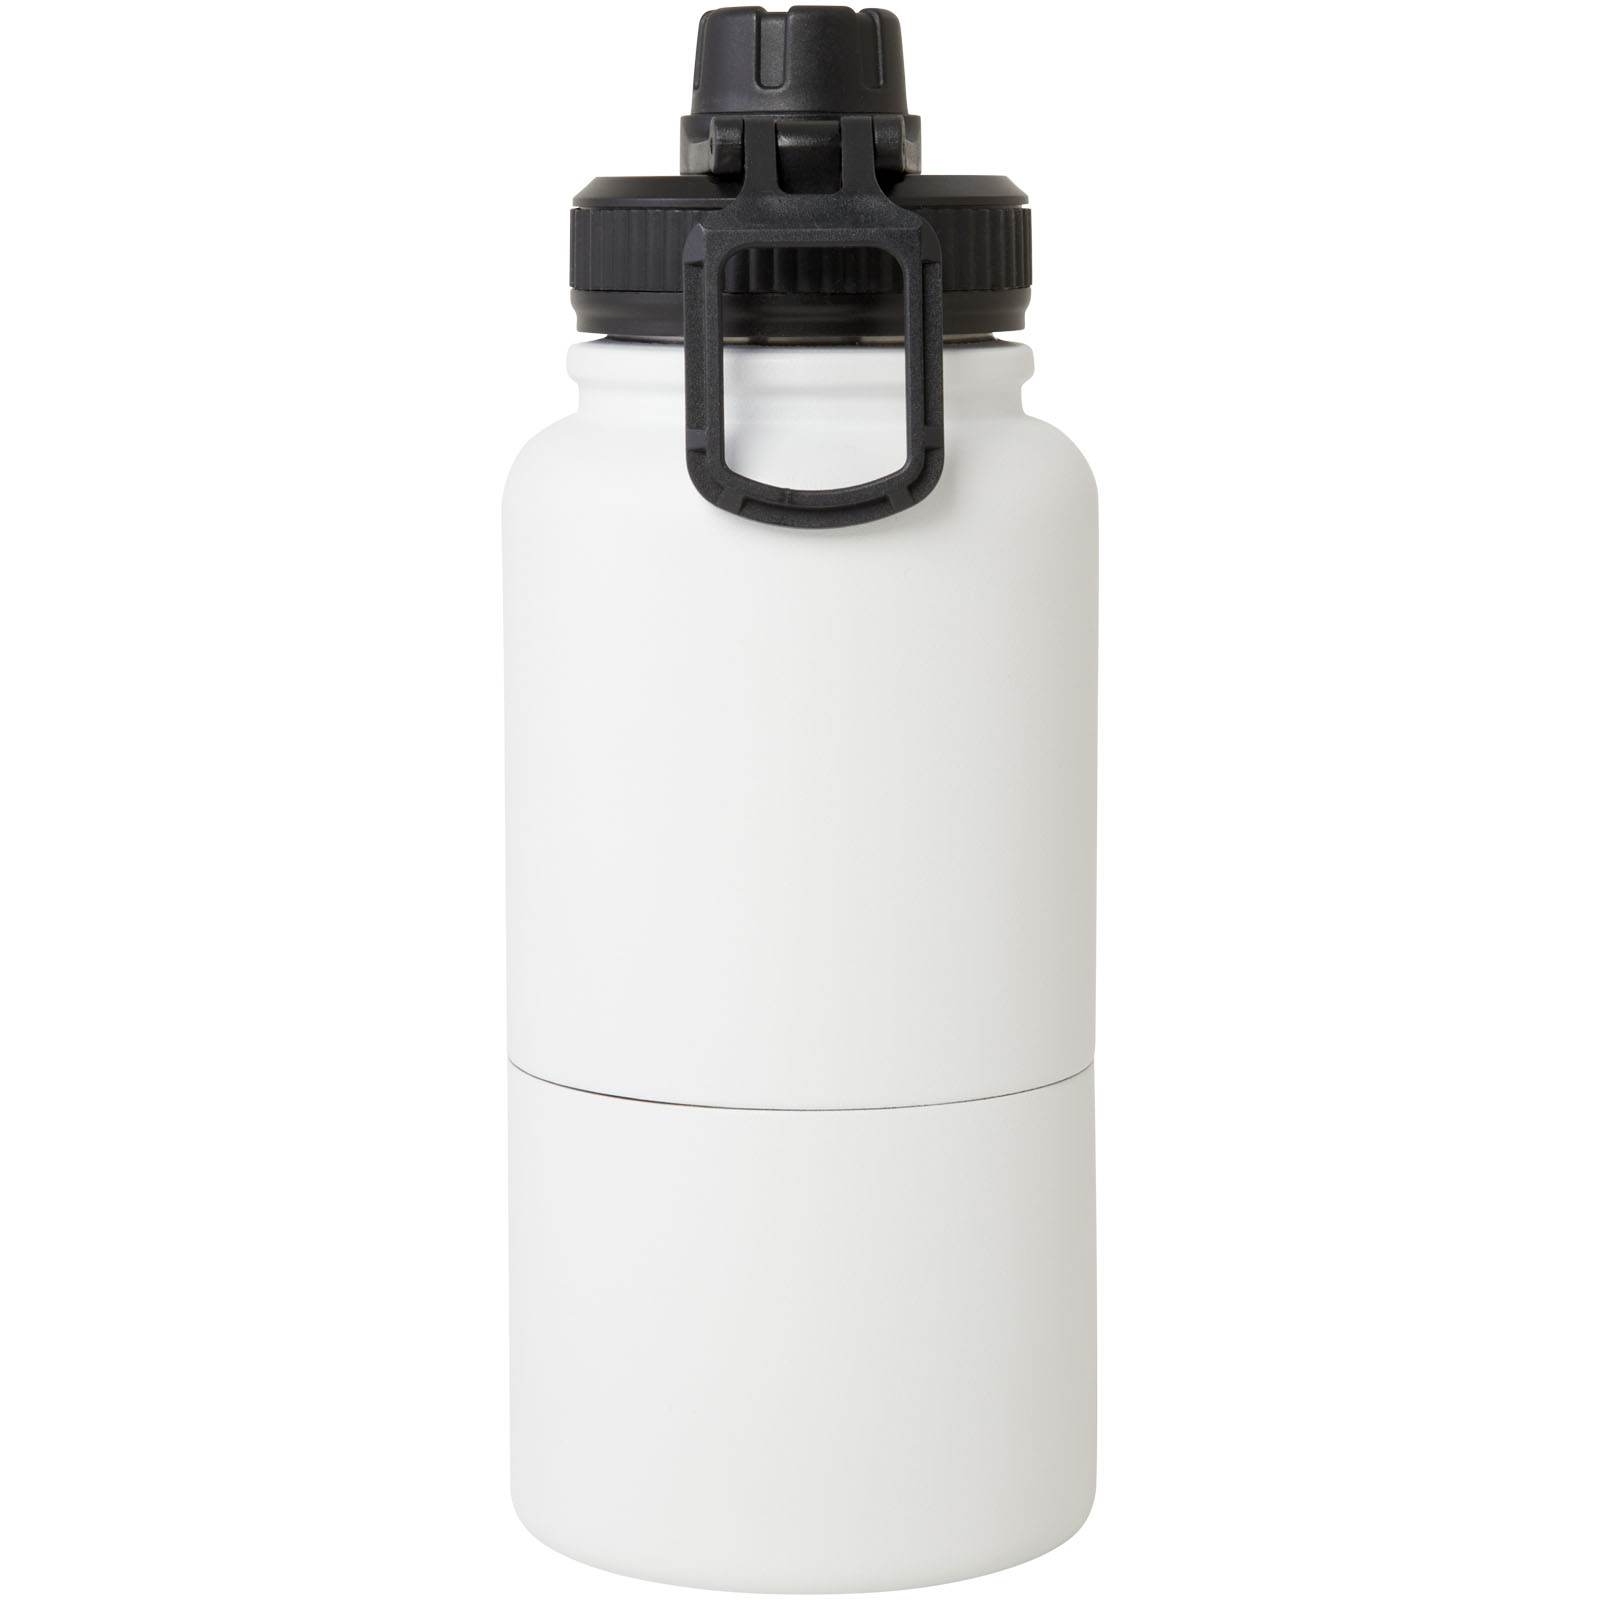 Advertising Insulated bottles - Dupeca 840 ml RCS certified stainless steel insulated sport bottle - 2